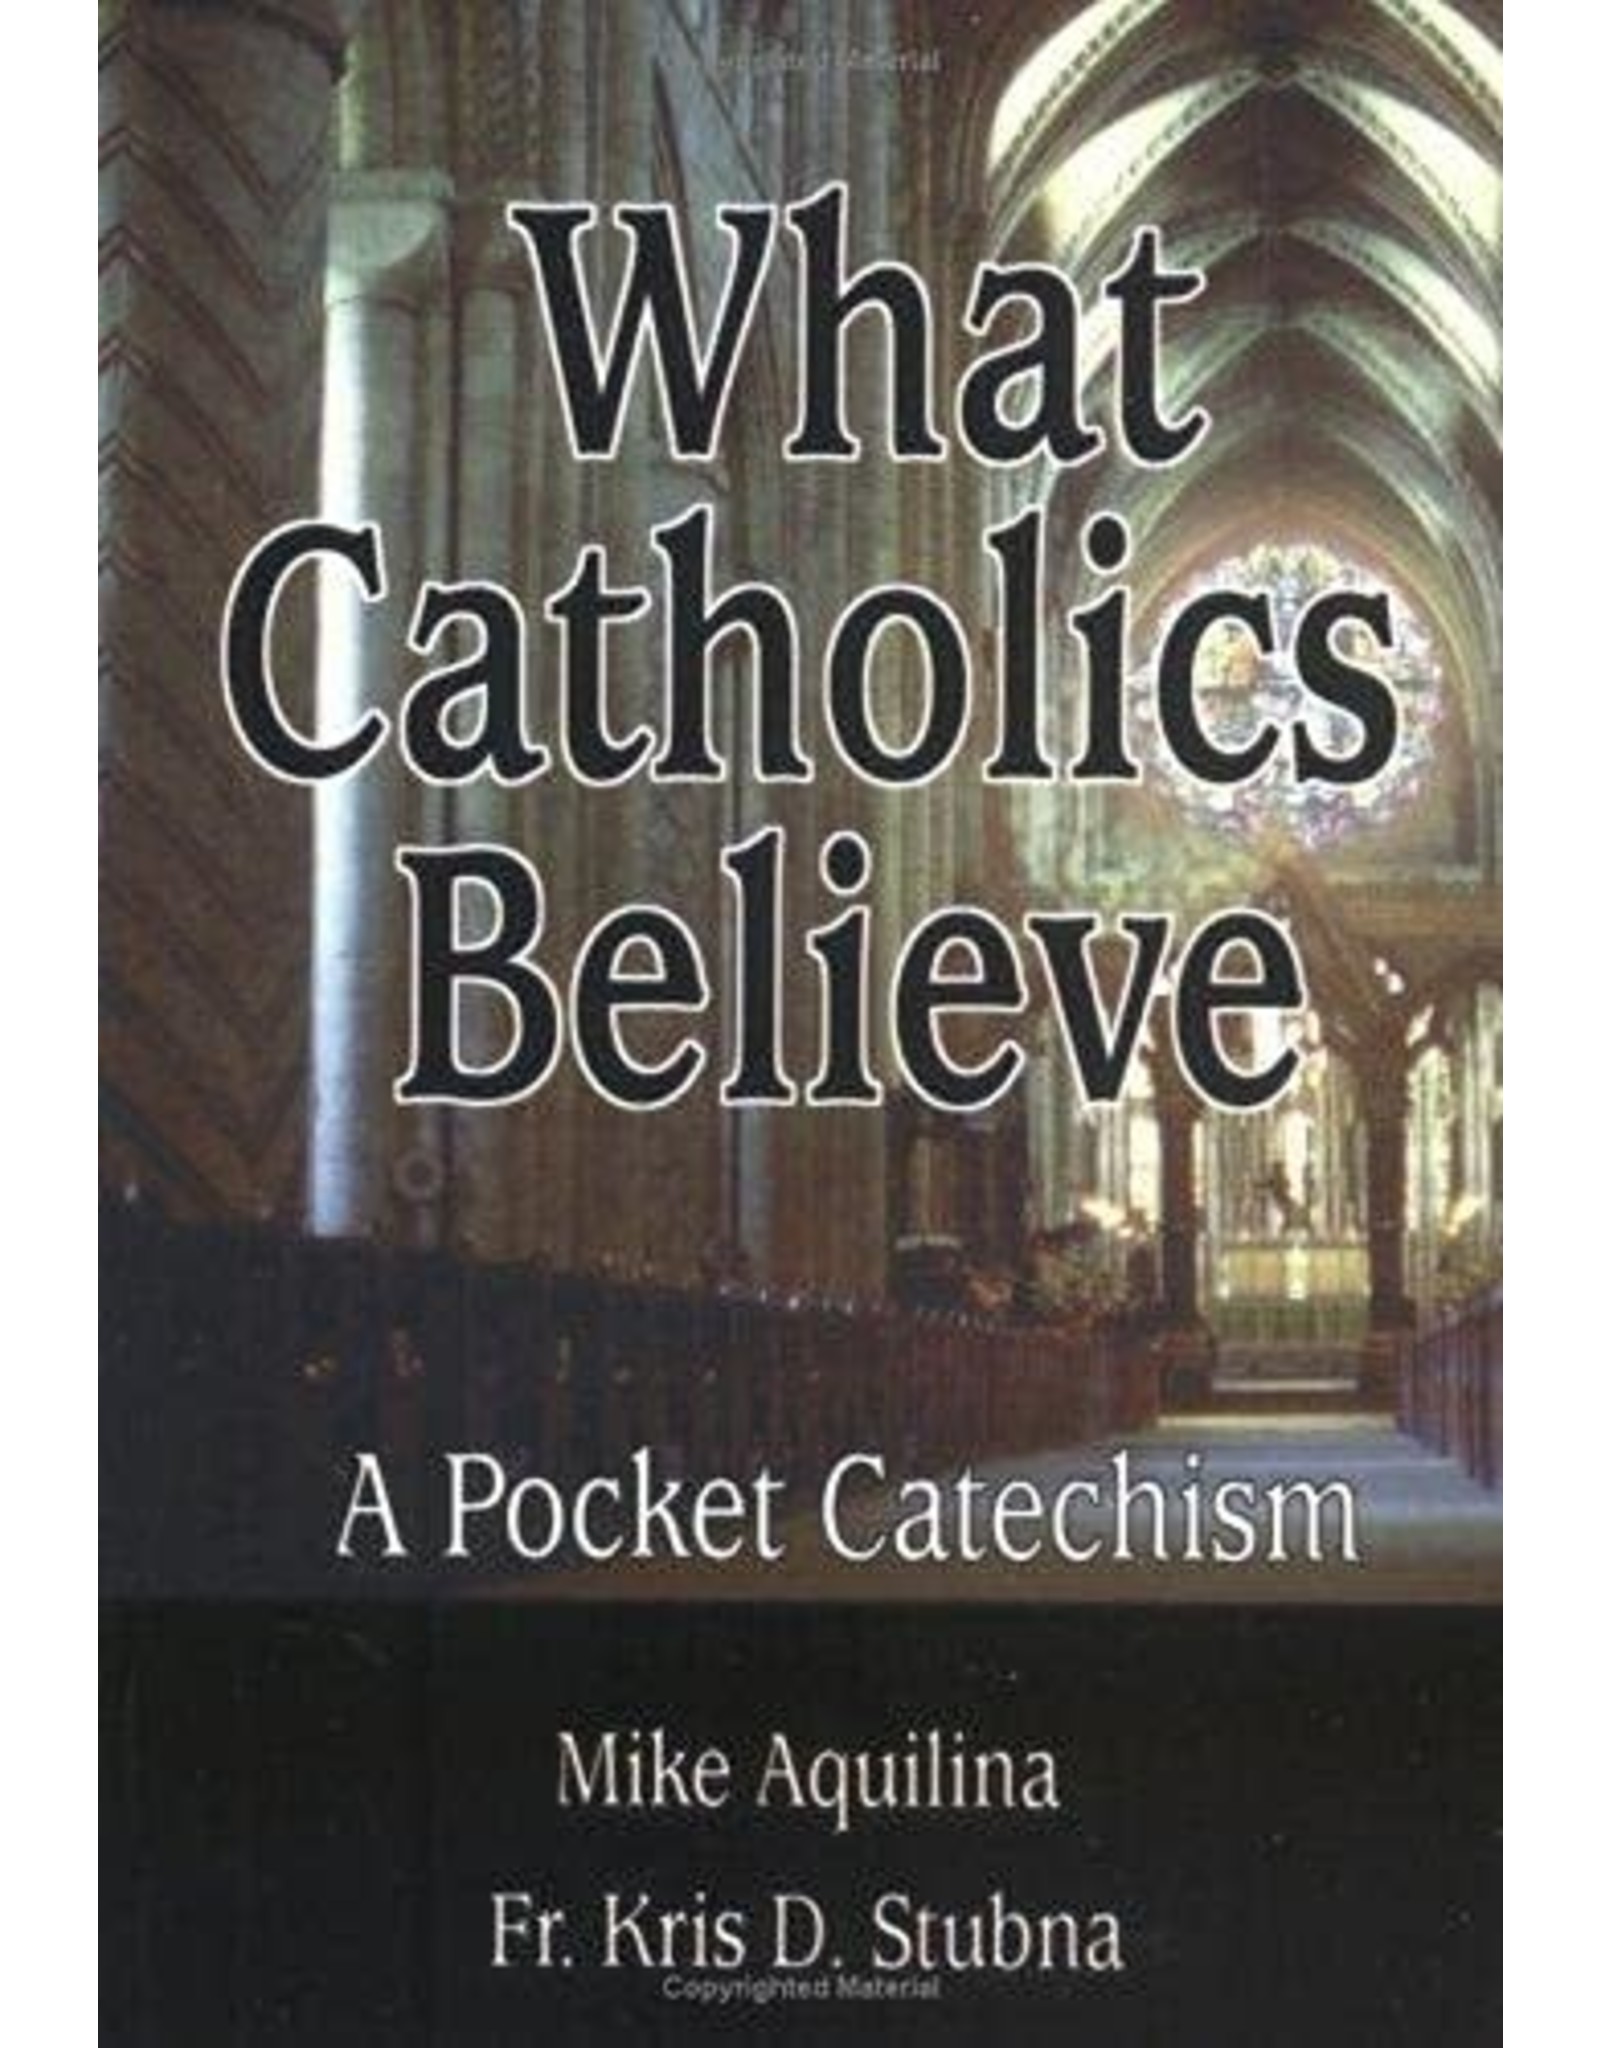 OSV (Our Sunday Visitor) What Catholics Believe: A Pocket Catechism